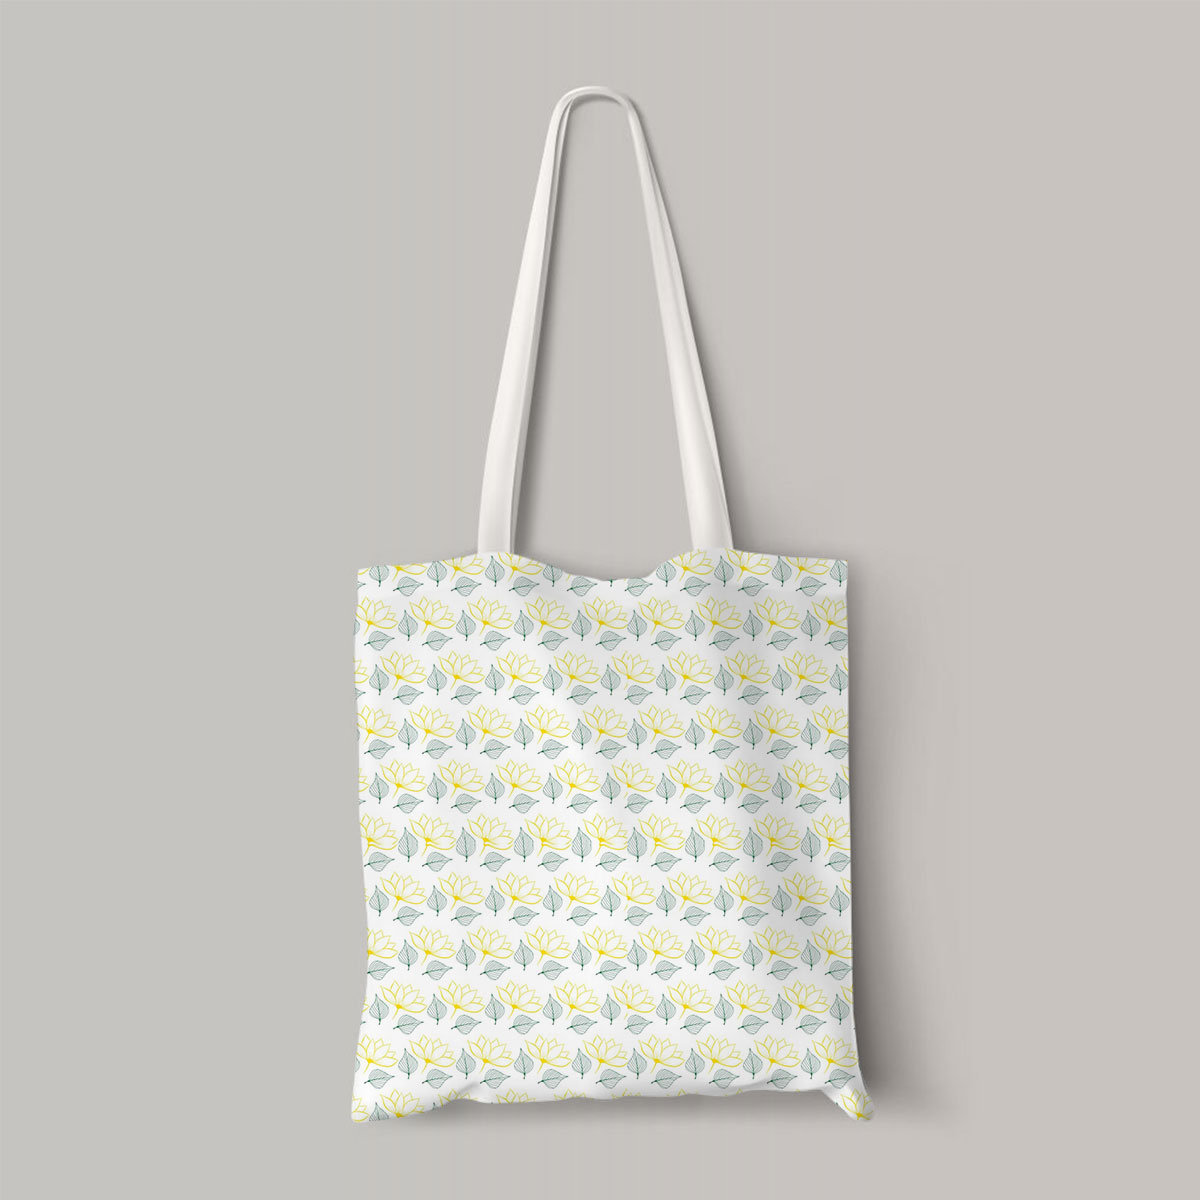 Magnolia With Leaves Seamless Pattern Totebag